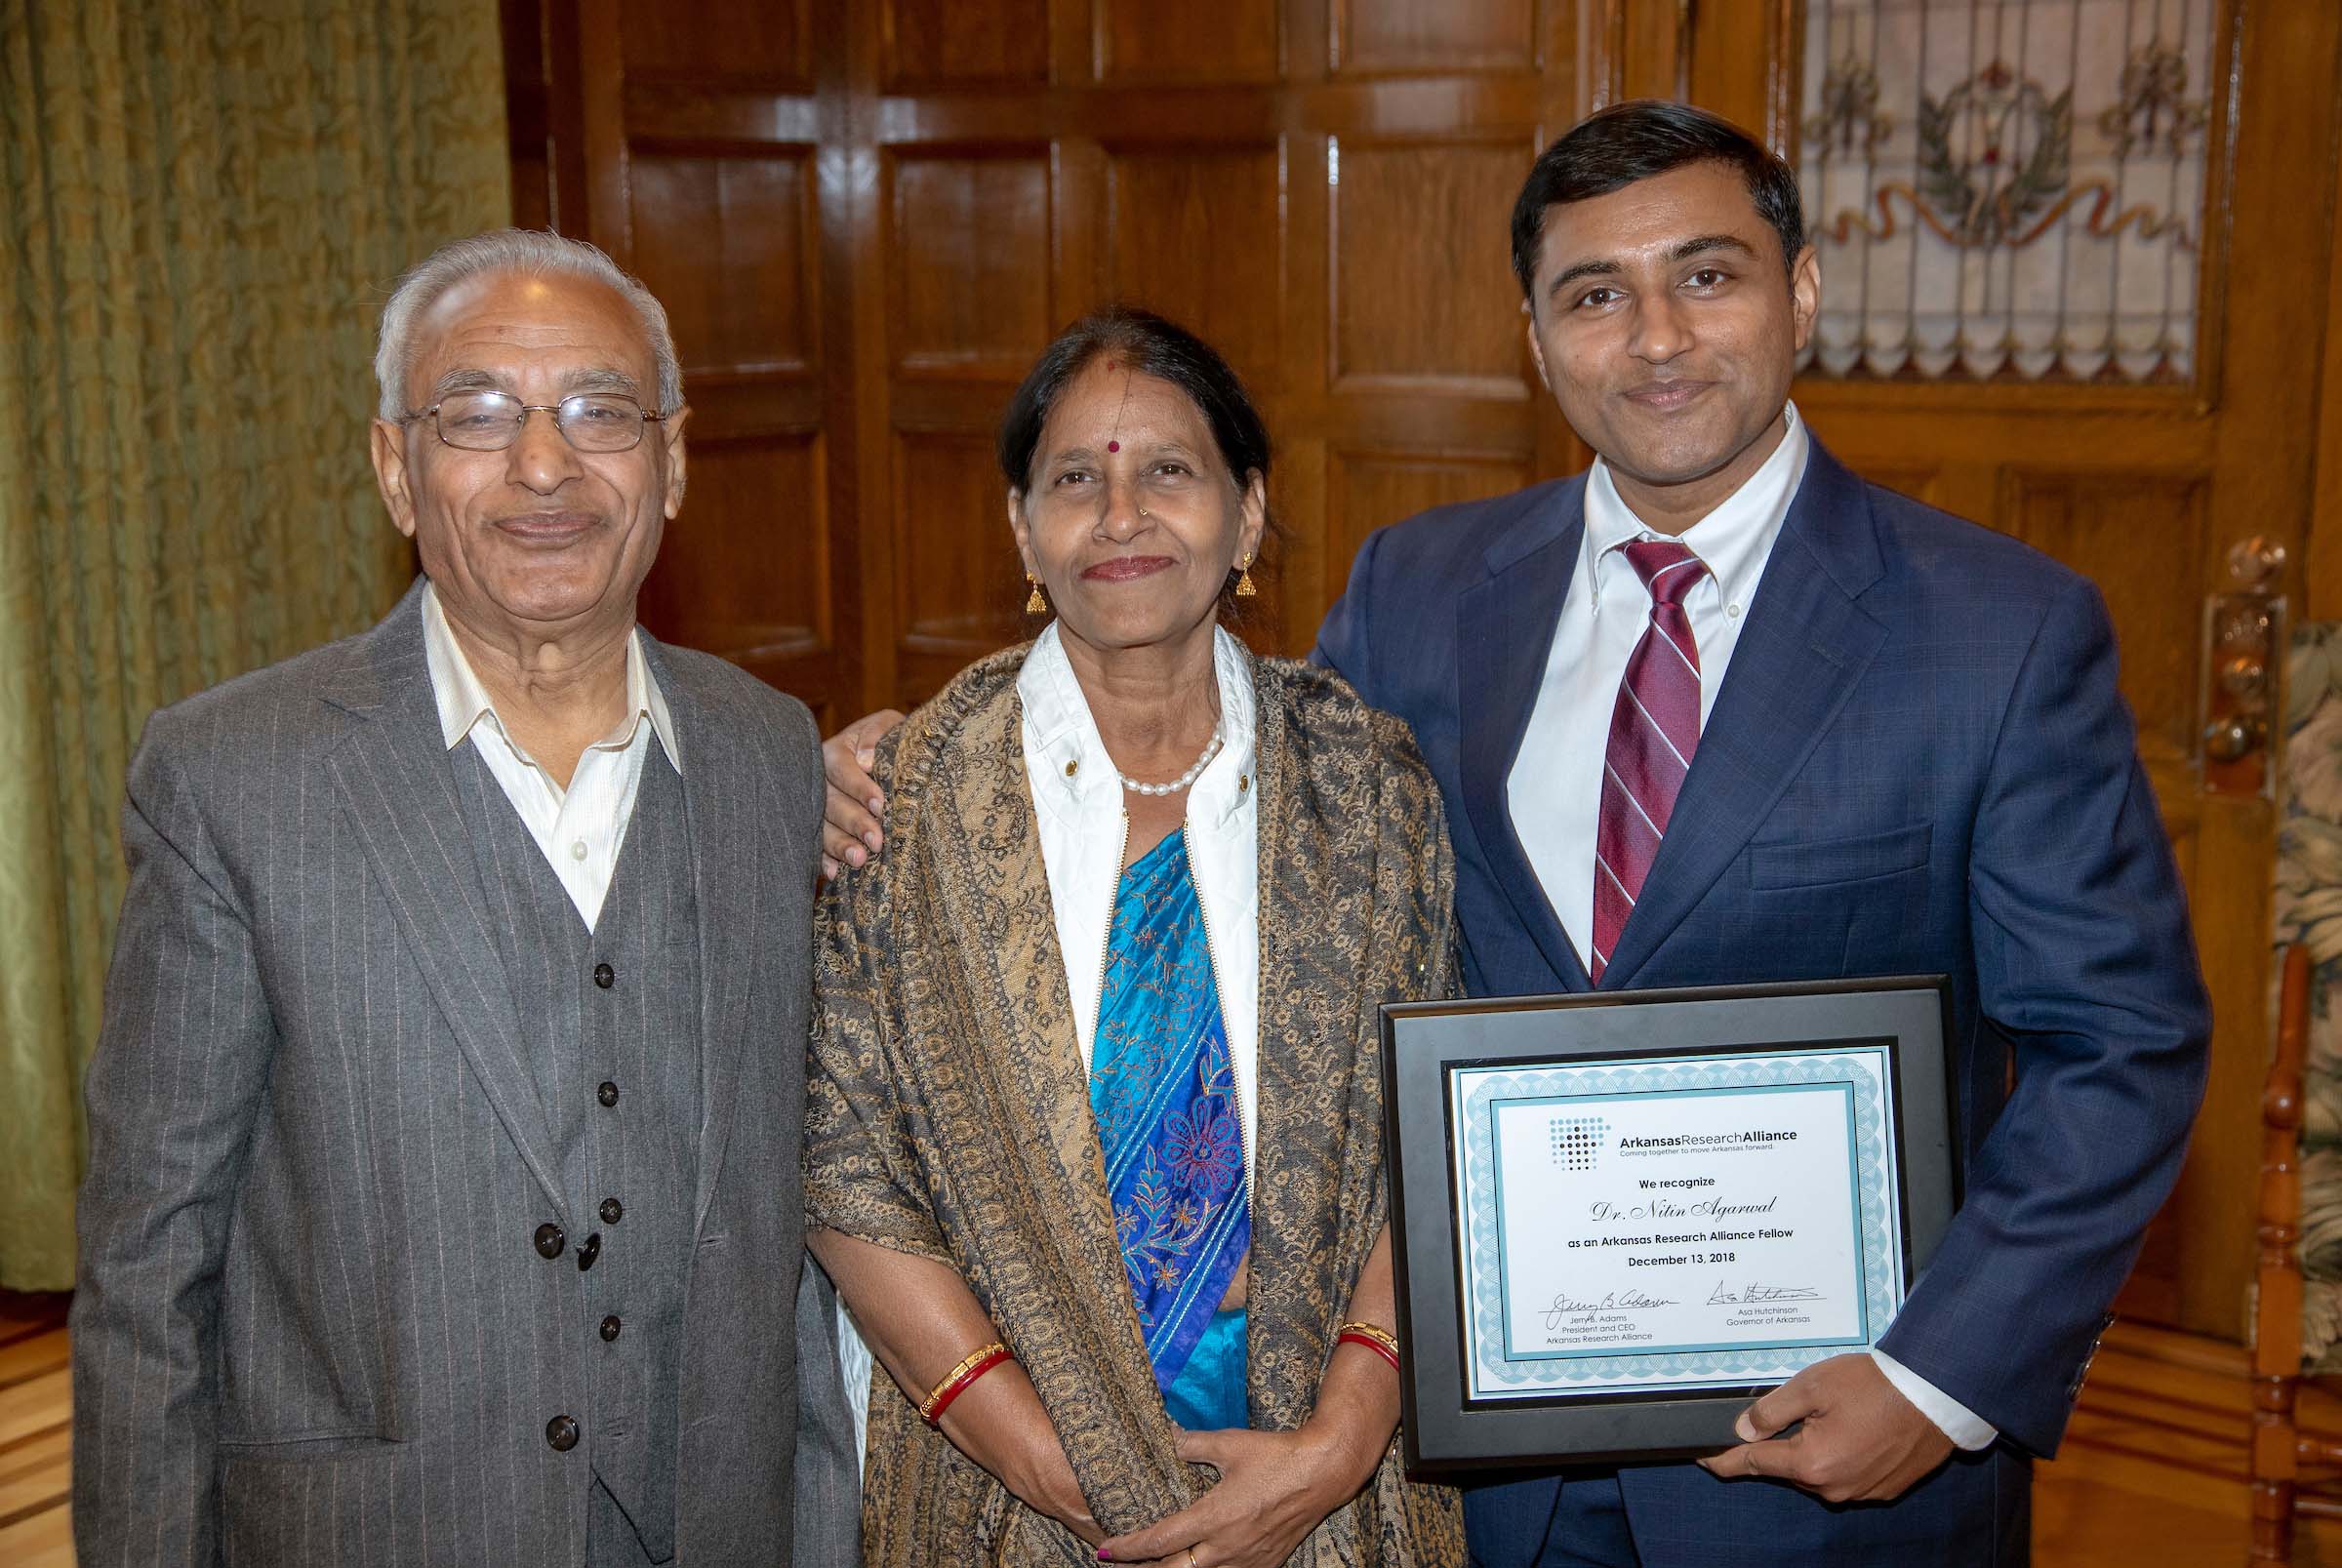 2. Dr. Nitin Agarwal celebrates with his parents as he is named a fellow of the Arkansas Research Alliance (ARA) Academy in 2018 at the Arkansas State Capitol.